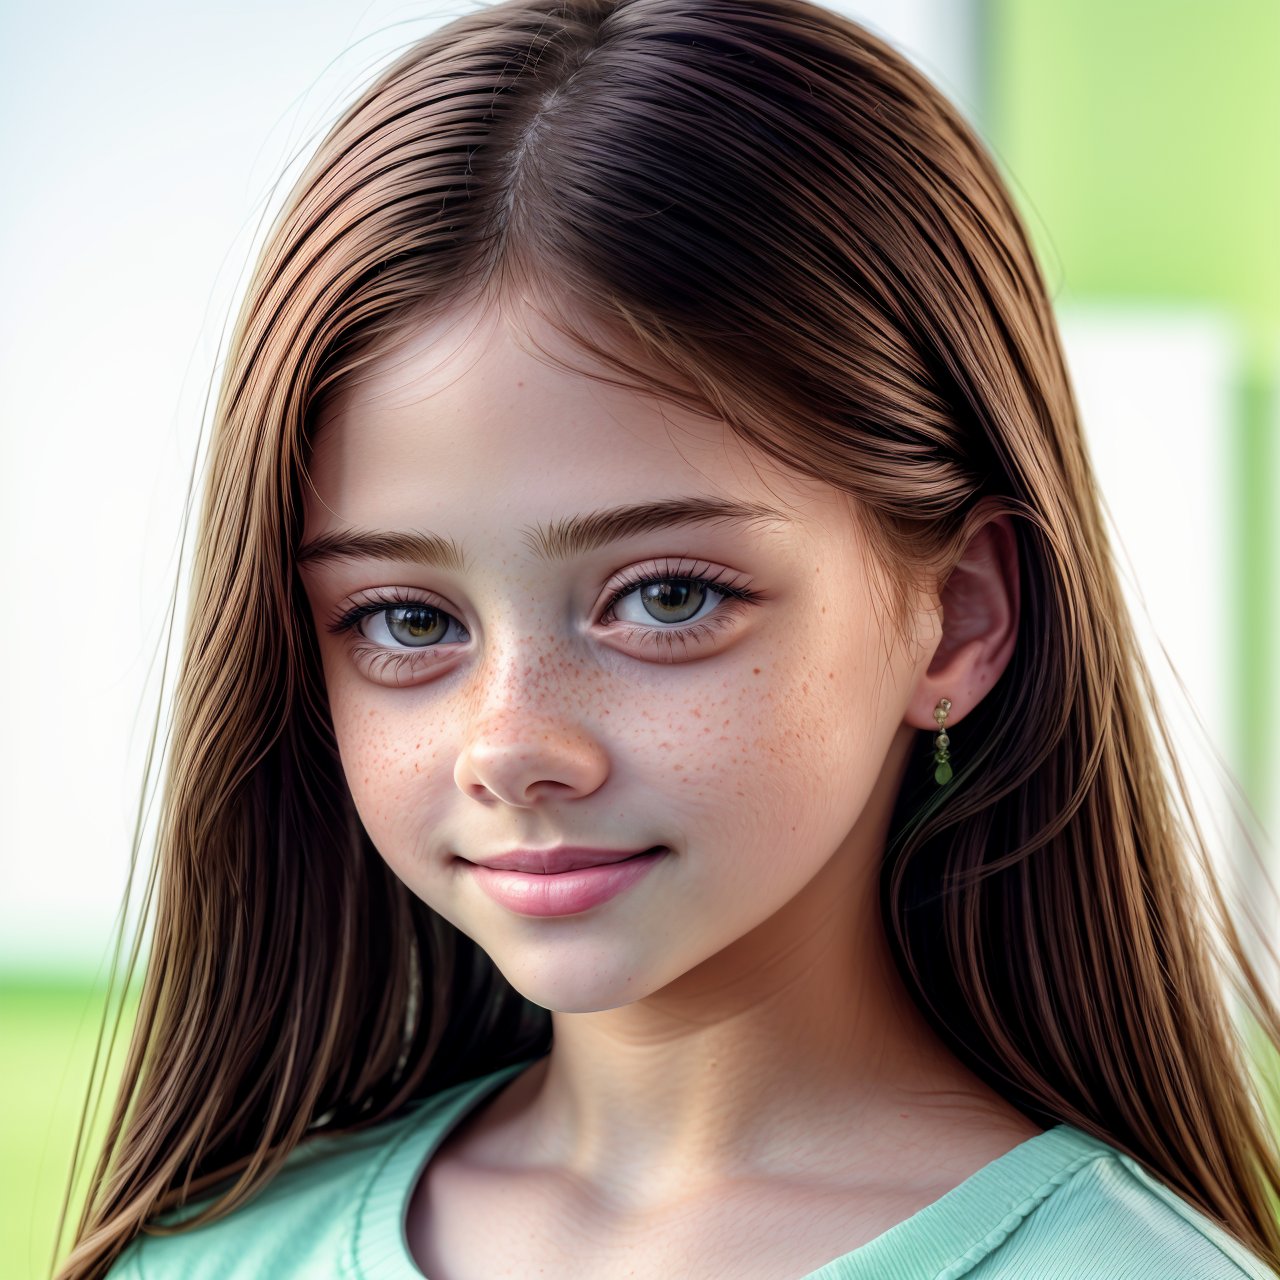 (masterpiece:1.3), HD quality, HD, HQ, 4K view from above, close up of smiling (AIDA_LoRA_RiWo:1.07) <lora:AIDA_LoRA_RiWo:0.88> in (simple light green shirt:1.1), [little girl], glossy skin with visible pores and freckles, pretty face, parted lips, hyper realistic, kkw-ph1, (colorful:1.1), (studio photo:1.1), (simple white background:1.1)